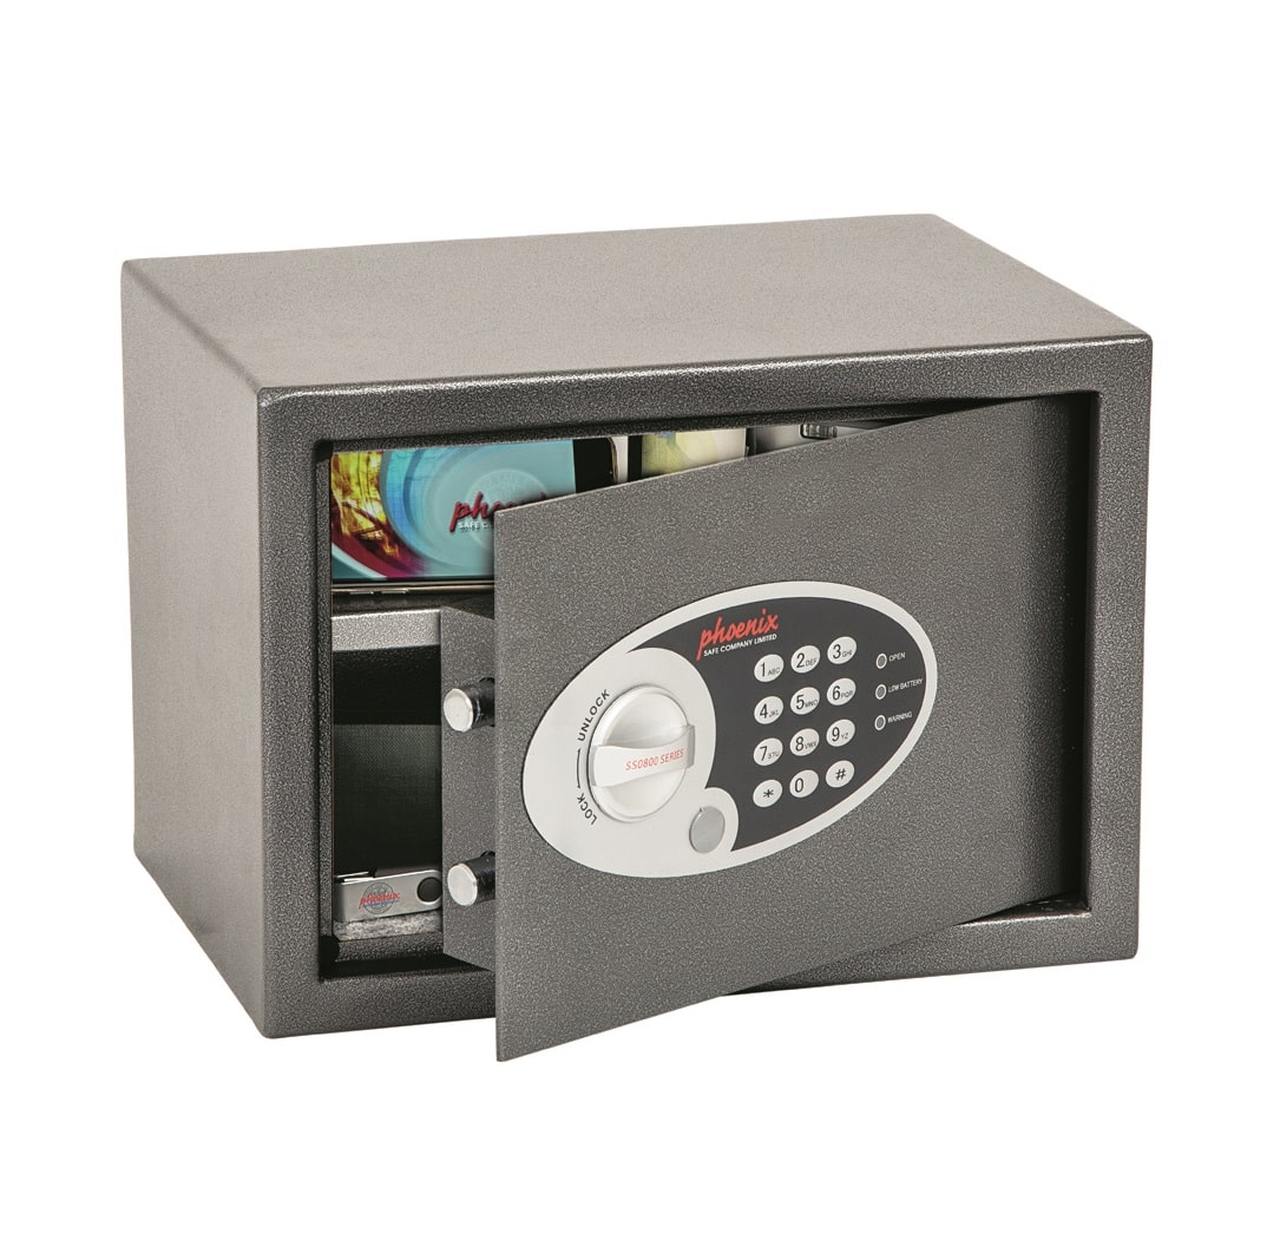 Safes - what you should know - Risk Assessment Products